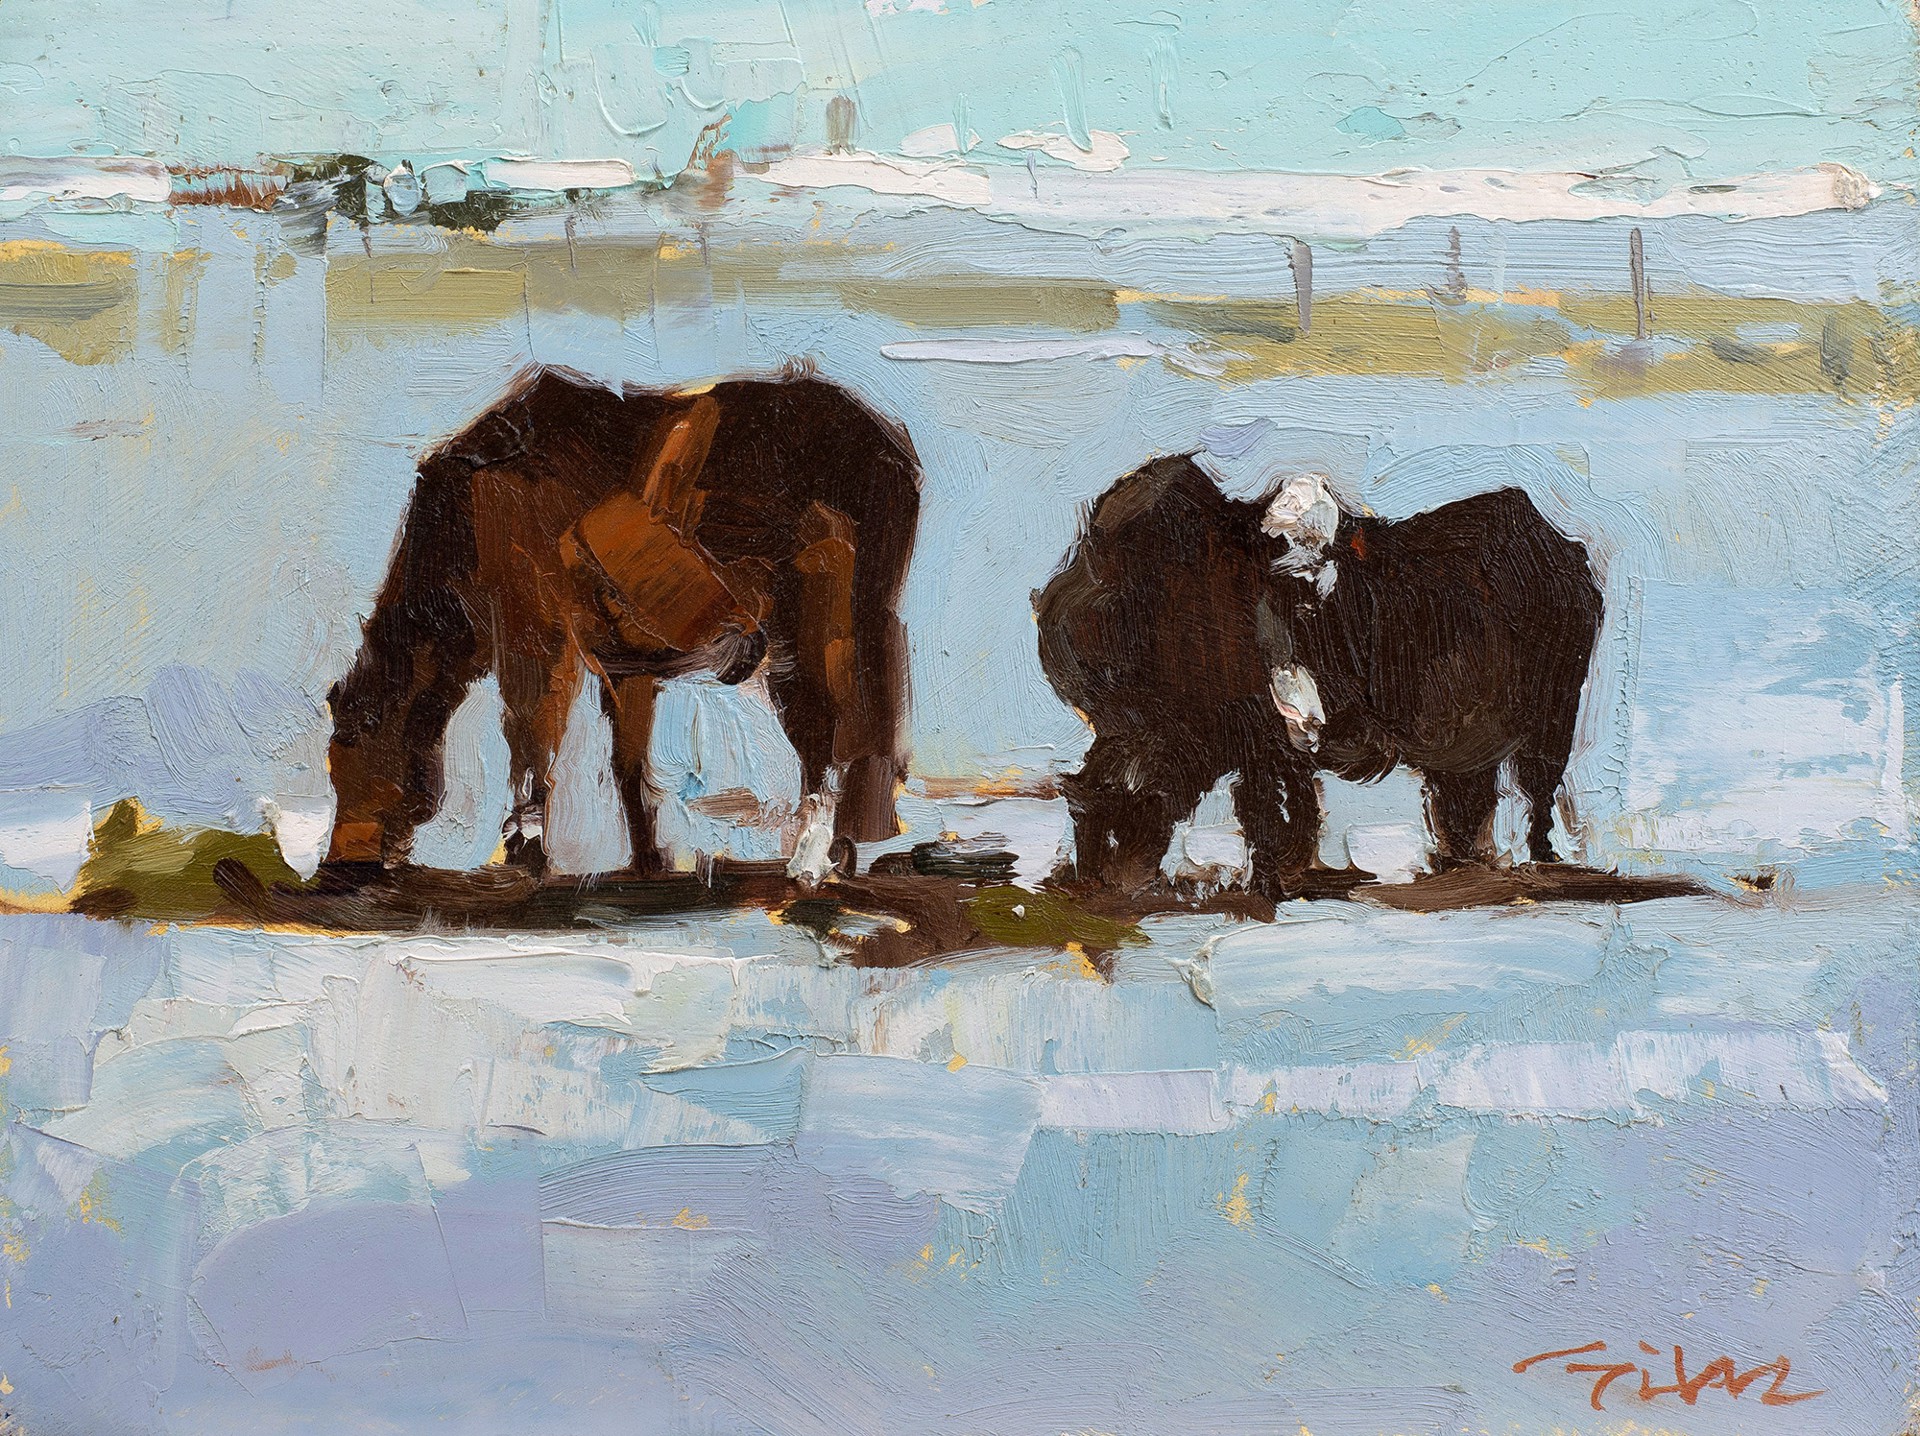 Oil Painting With Horse And Cow Winter Scene By Silas Thompson